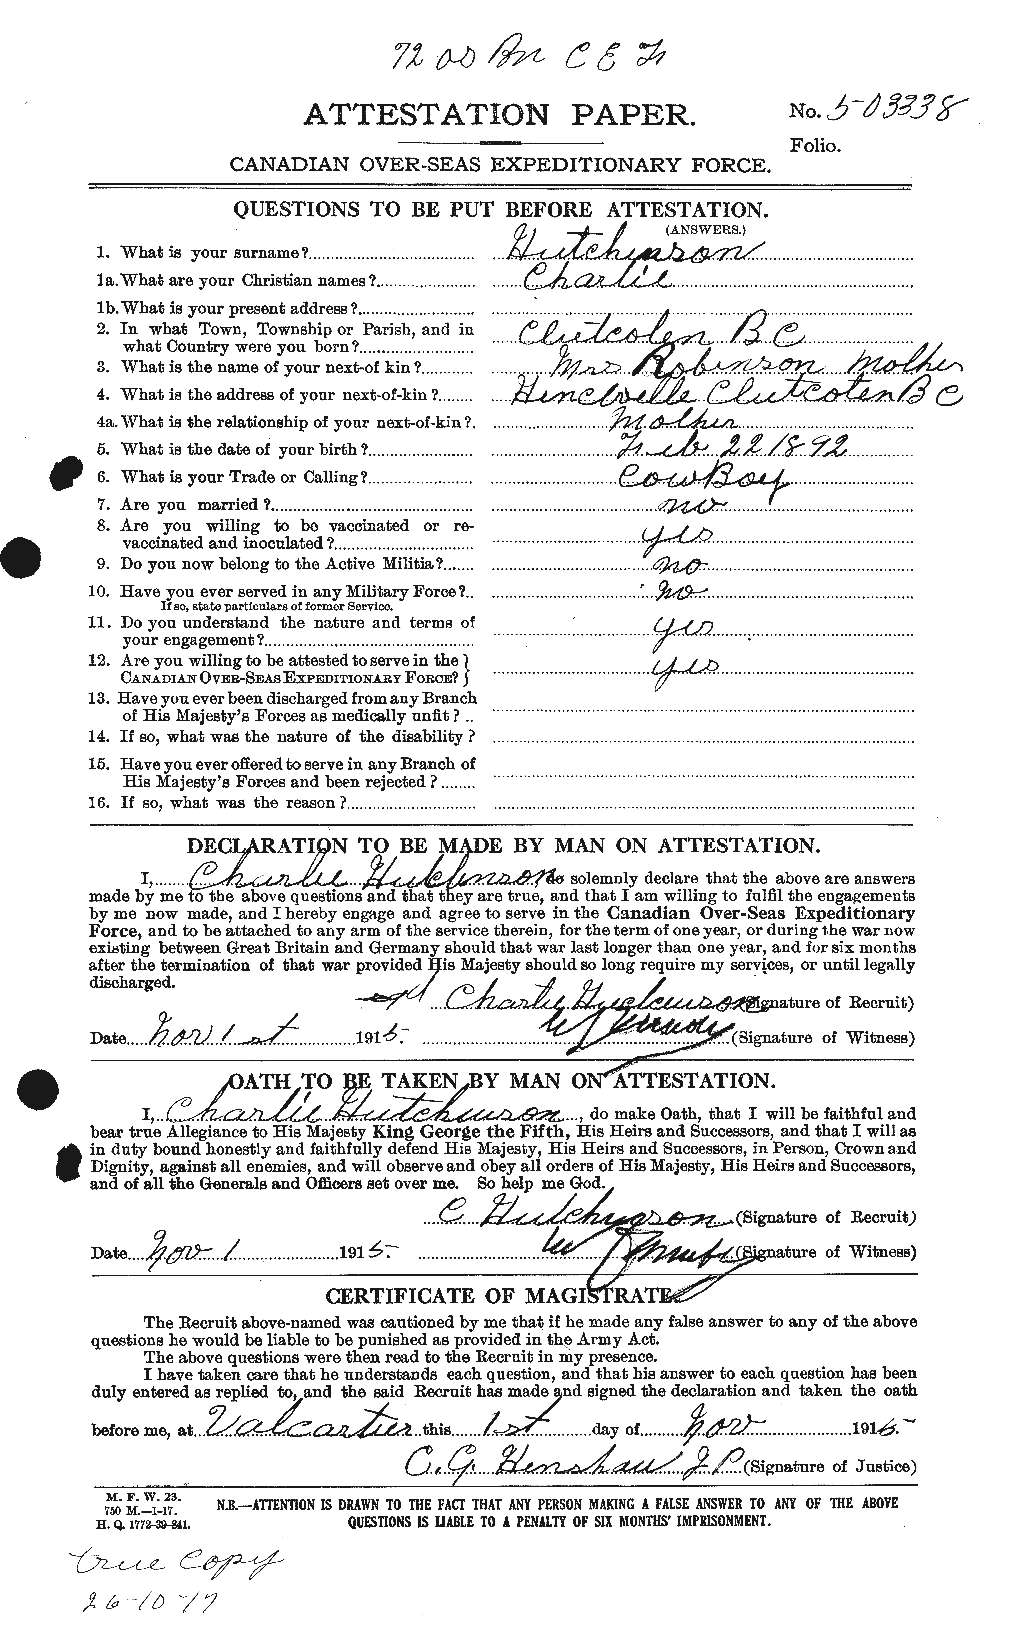 Personnel Records of the First World War - CEF 408147a